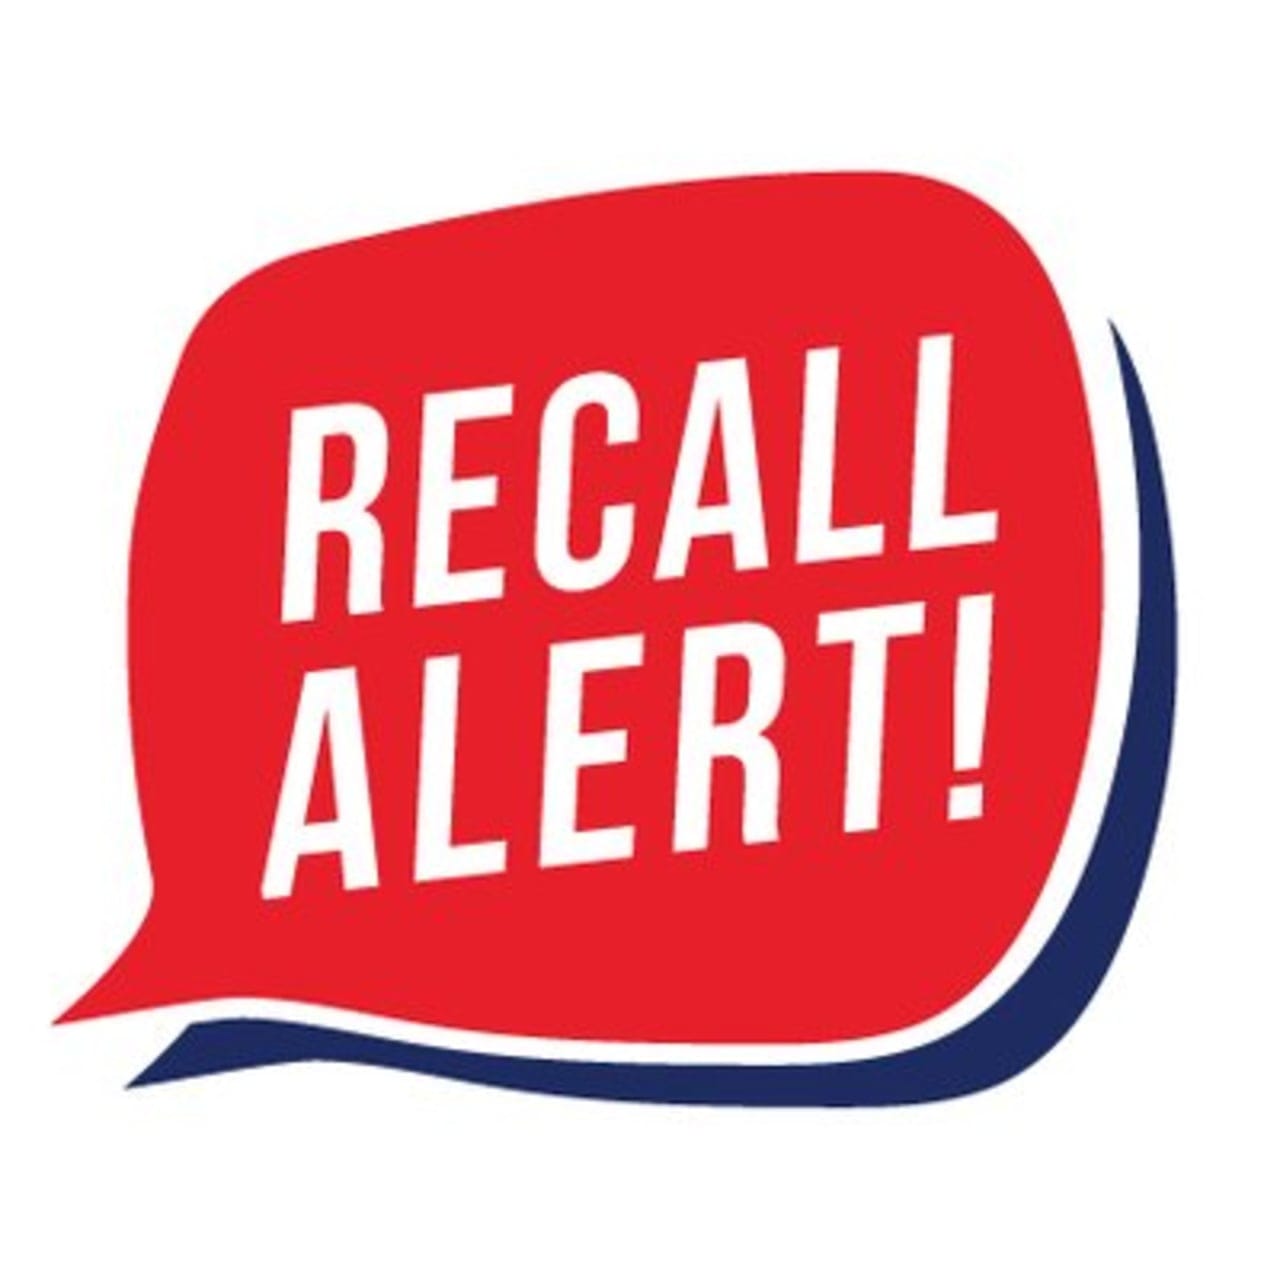 More than 2,800 pounds of veal and lamb products are being recalled.